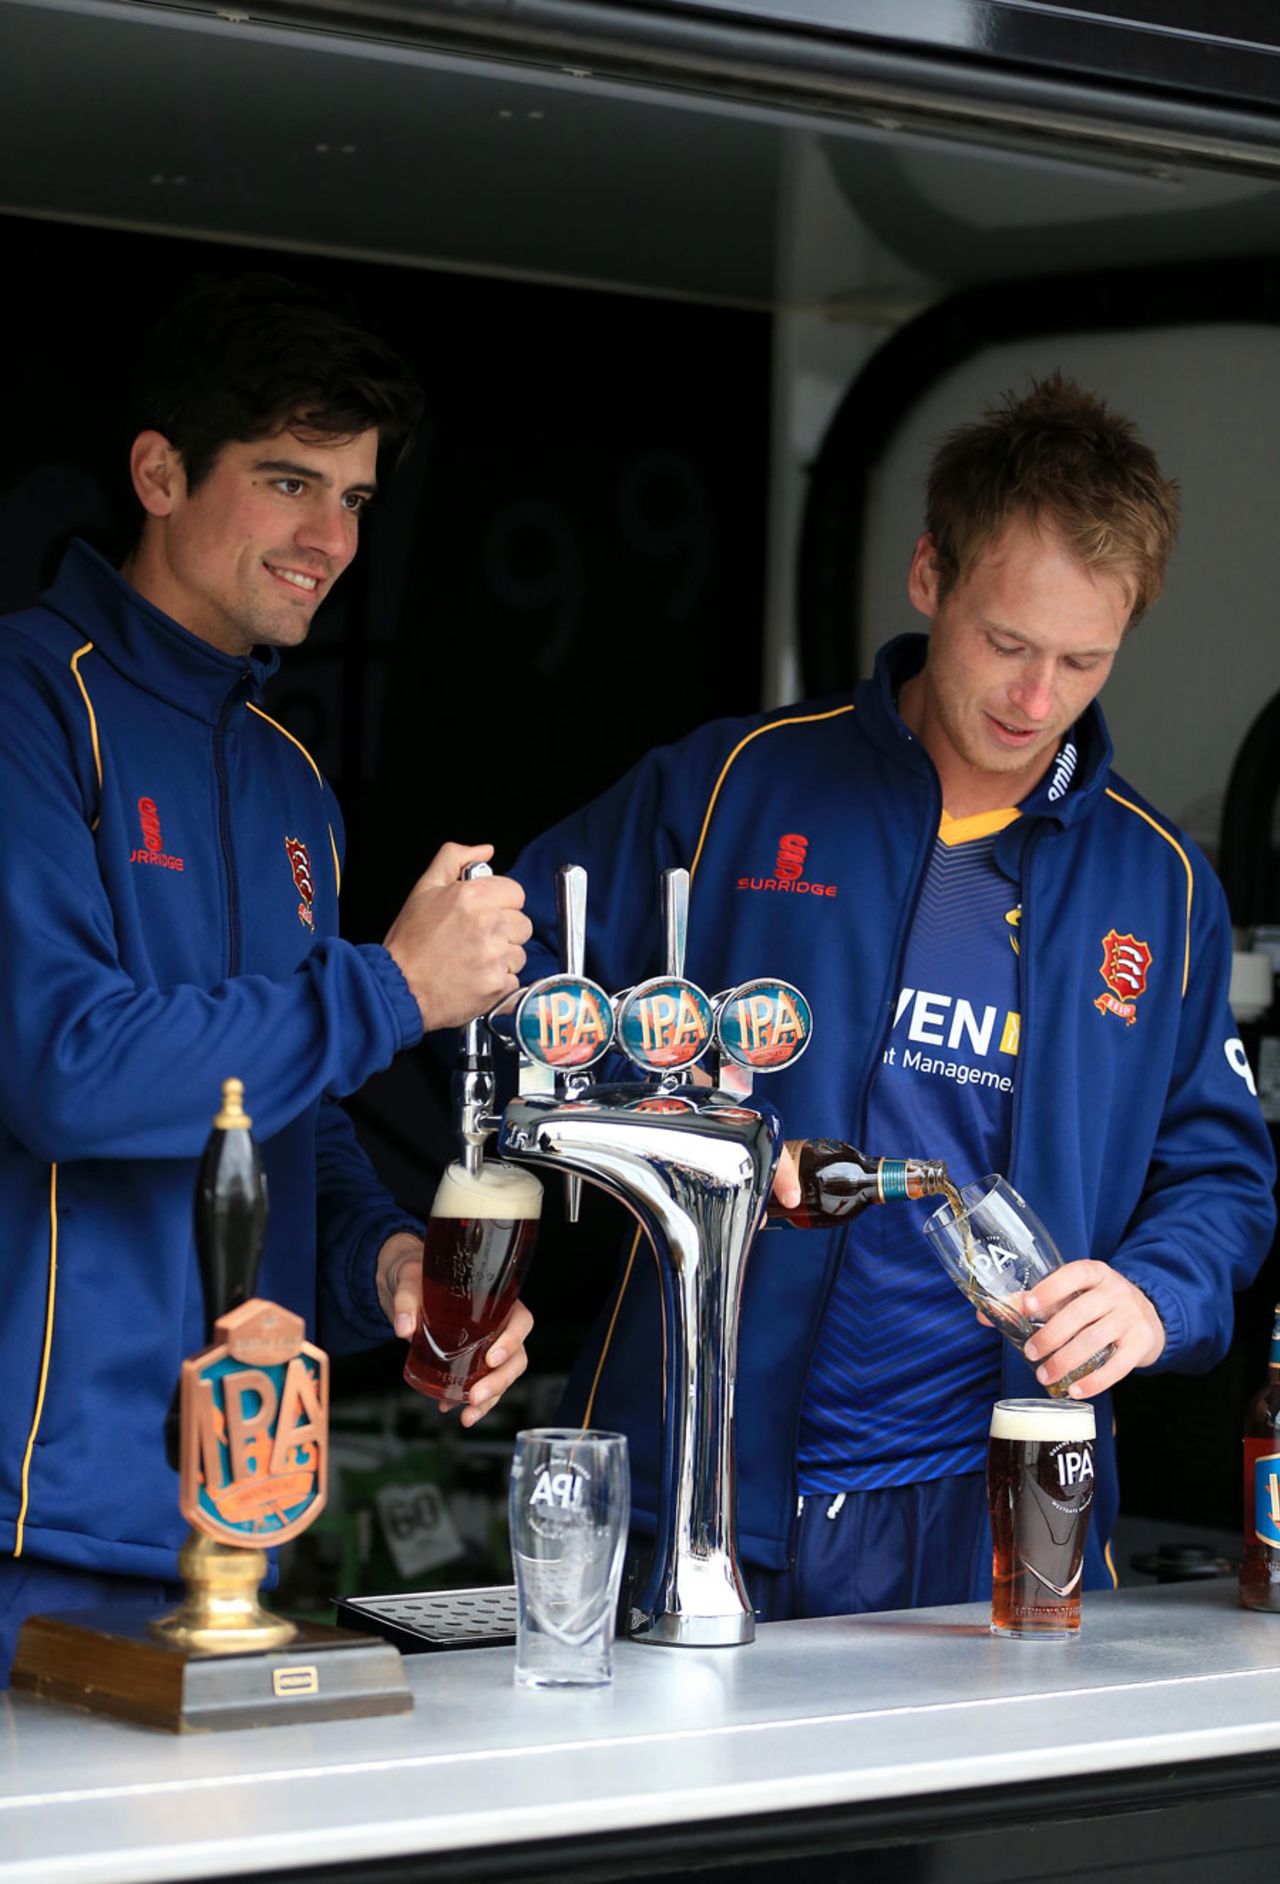 Alastair Cook and Tom Westley put in a shift behind the bar, Chelmsford, April 7, 2016